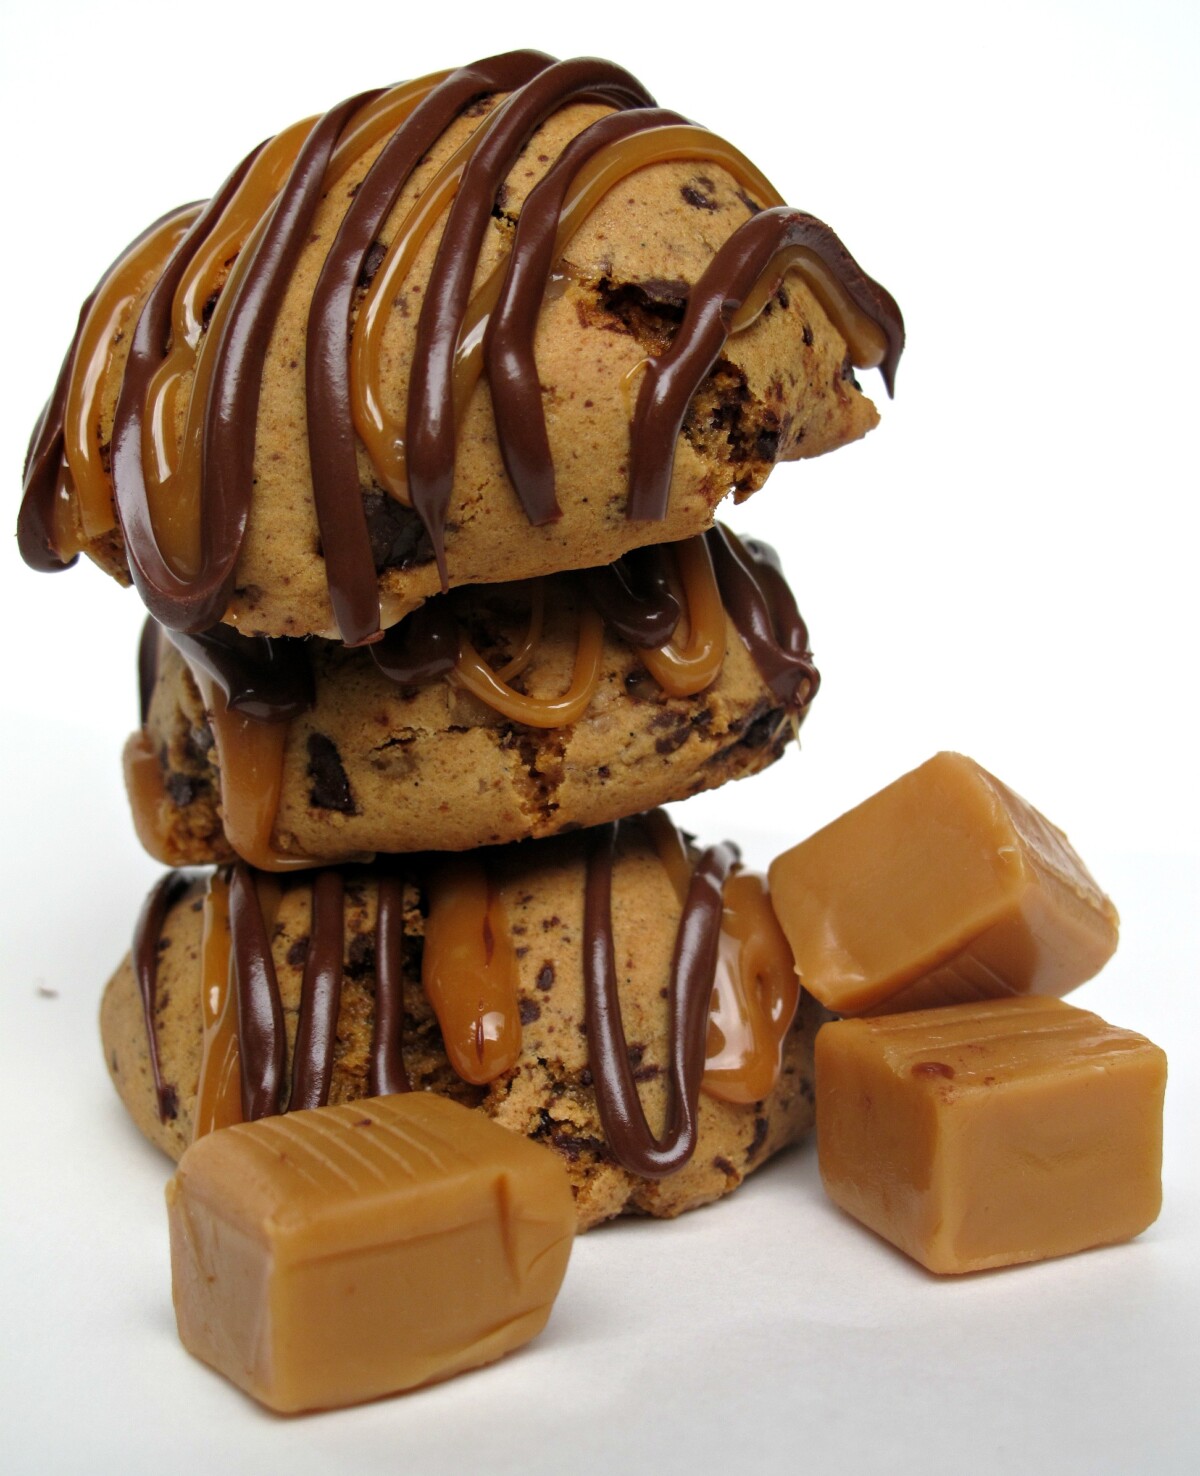 Stack of three cookies with zigzags of chocolate and caramel over the rounded tops.